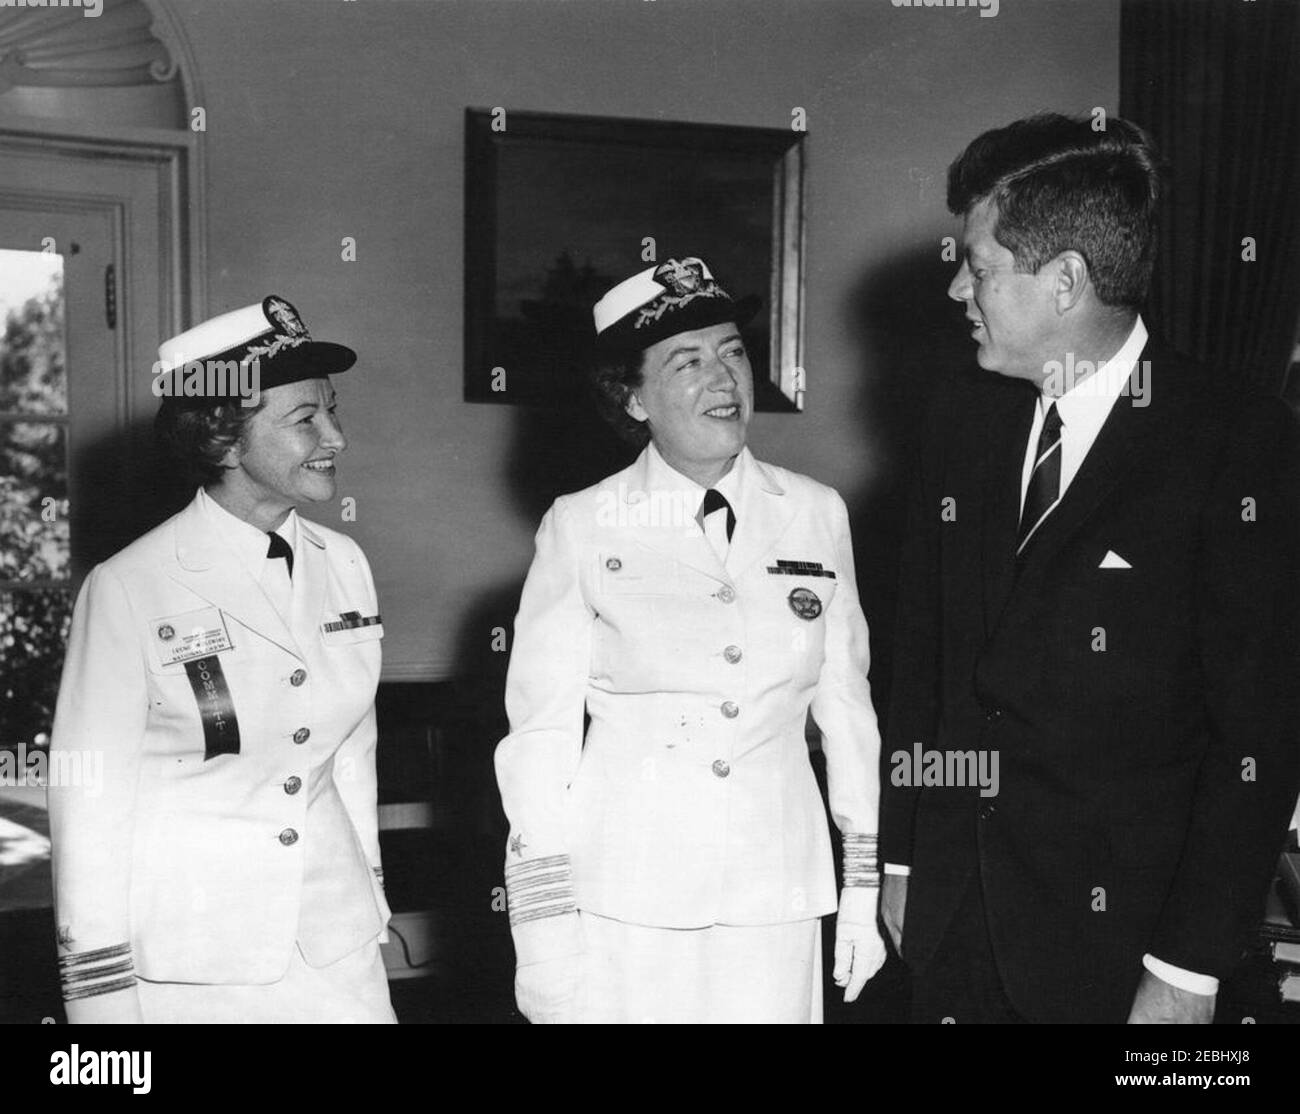 Visit of Captain Winifred Quick Collins, Director of Women Accepted for Volunteer Emergency Service (WAVES), 9:48AM. President John F. Kennedy visits with U.S. Navy officers. Left to right: Women Accepted for Volunteer Emergency Service (WAVES) officer, Commander Irene Wolensky; Director of WAVES, Captain Winifred Quick Collins; and President Kennedy. Oval Office, White House, Washington, D.C. Stock Photo